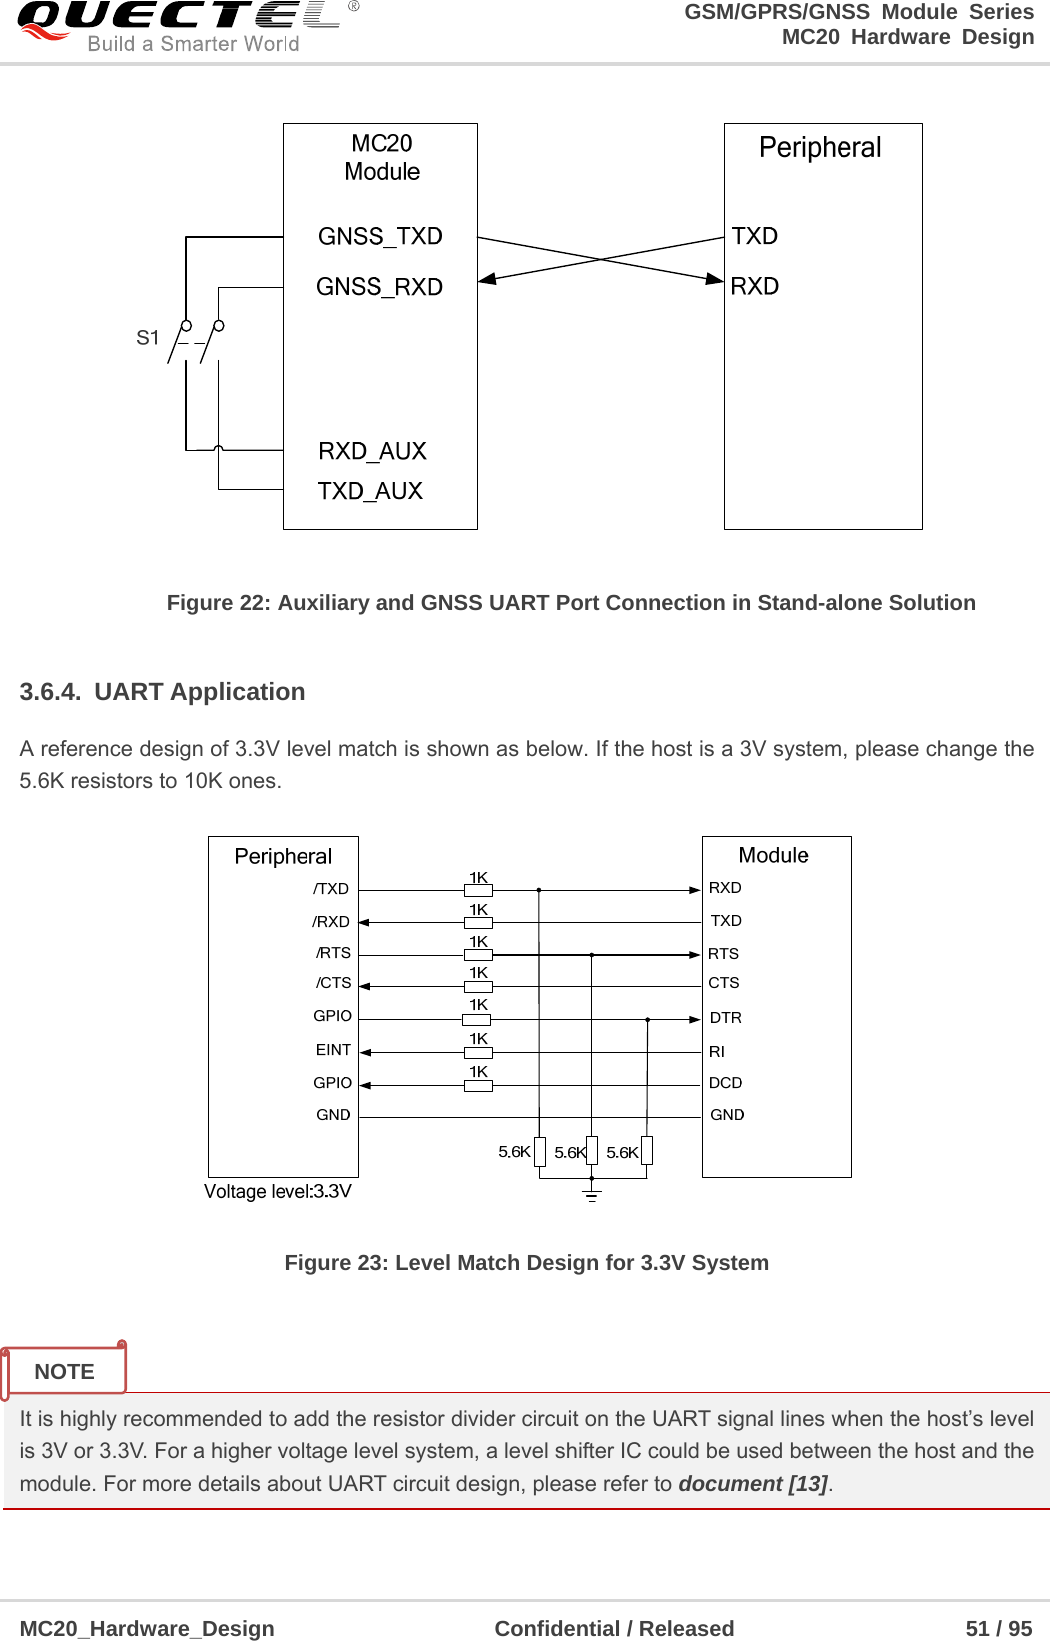                                                                     GSM/GPRS/GNSS Module Series                                                                 MC20 Hardware Design  MC20_Hardware_Design                    Confidential / Released                     51 / 95      Figure 22: Auxiliary and GNSS UART Port Connection in Stand-alone Solution  3.6.4. UART Application A reference design of 3.3V level match is shown as below. If the host is a 3V system, please change the 5.6K resistors to 10K ones.    Figure 23: Level Match Design for 3.3V System   It is highly recommended to add the resistor divider circuit on the UART signal lines when the host’s level is 3V or 3.3V. For a higher voltage level system, a level shifter IC could be used between the host and the module. For more details about UART circuit design, please refer to document [13].  NOTE 